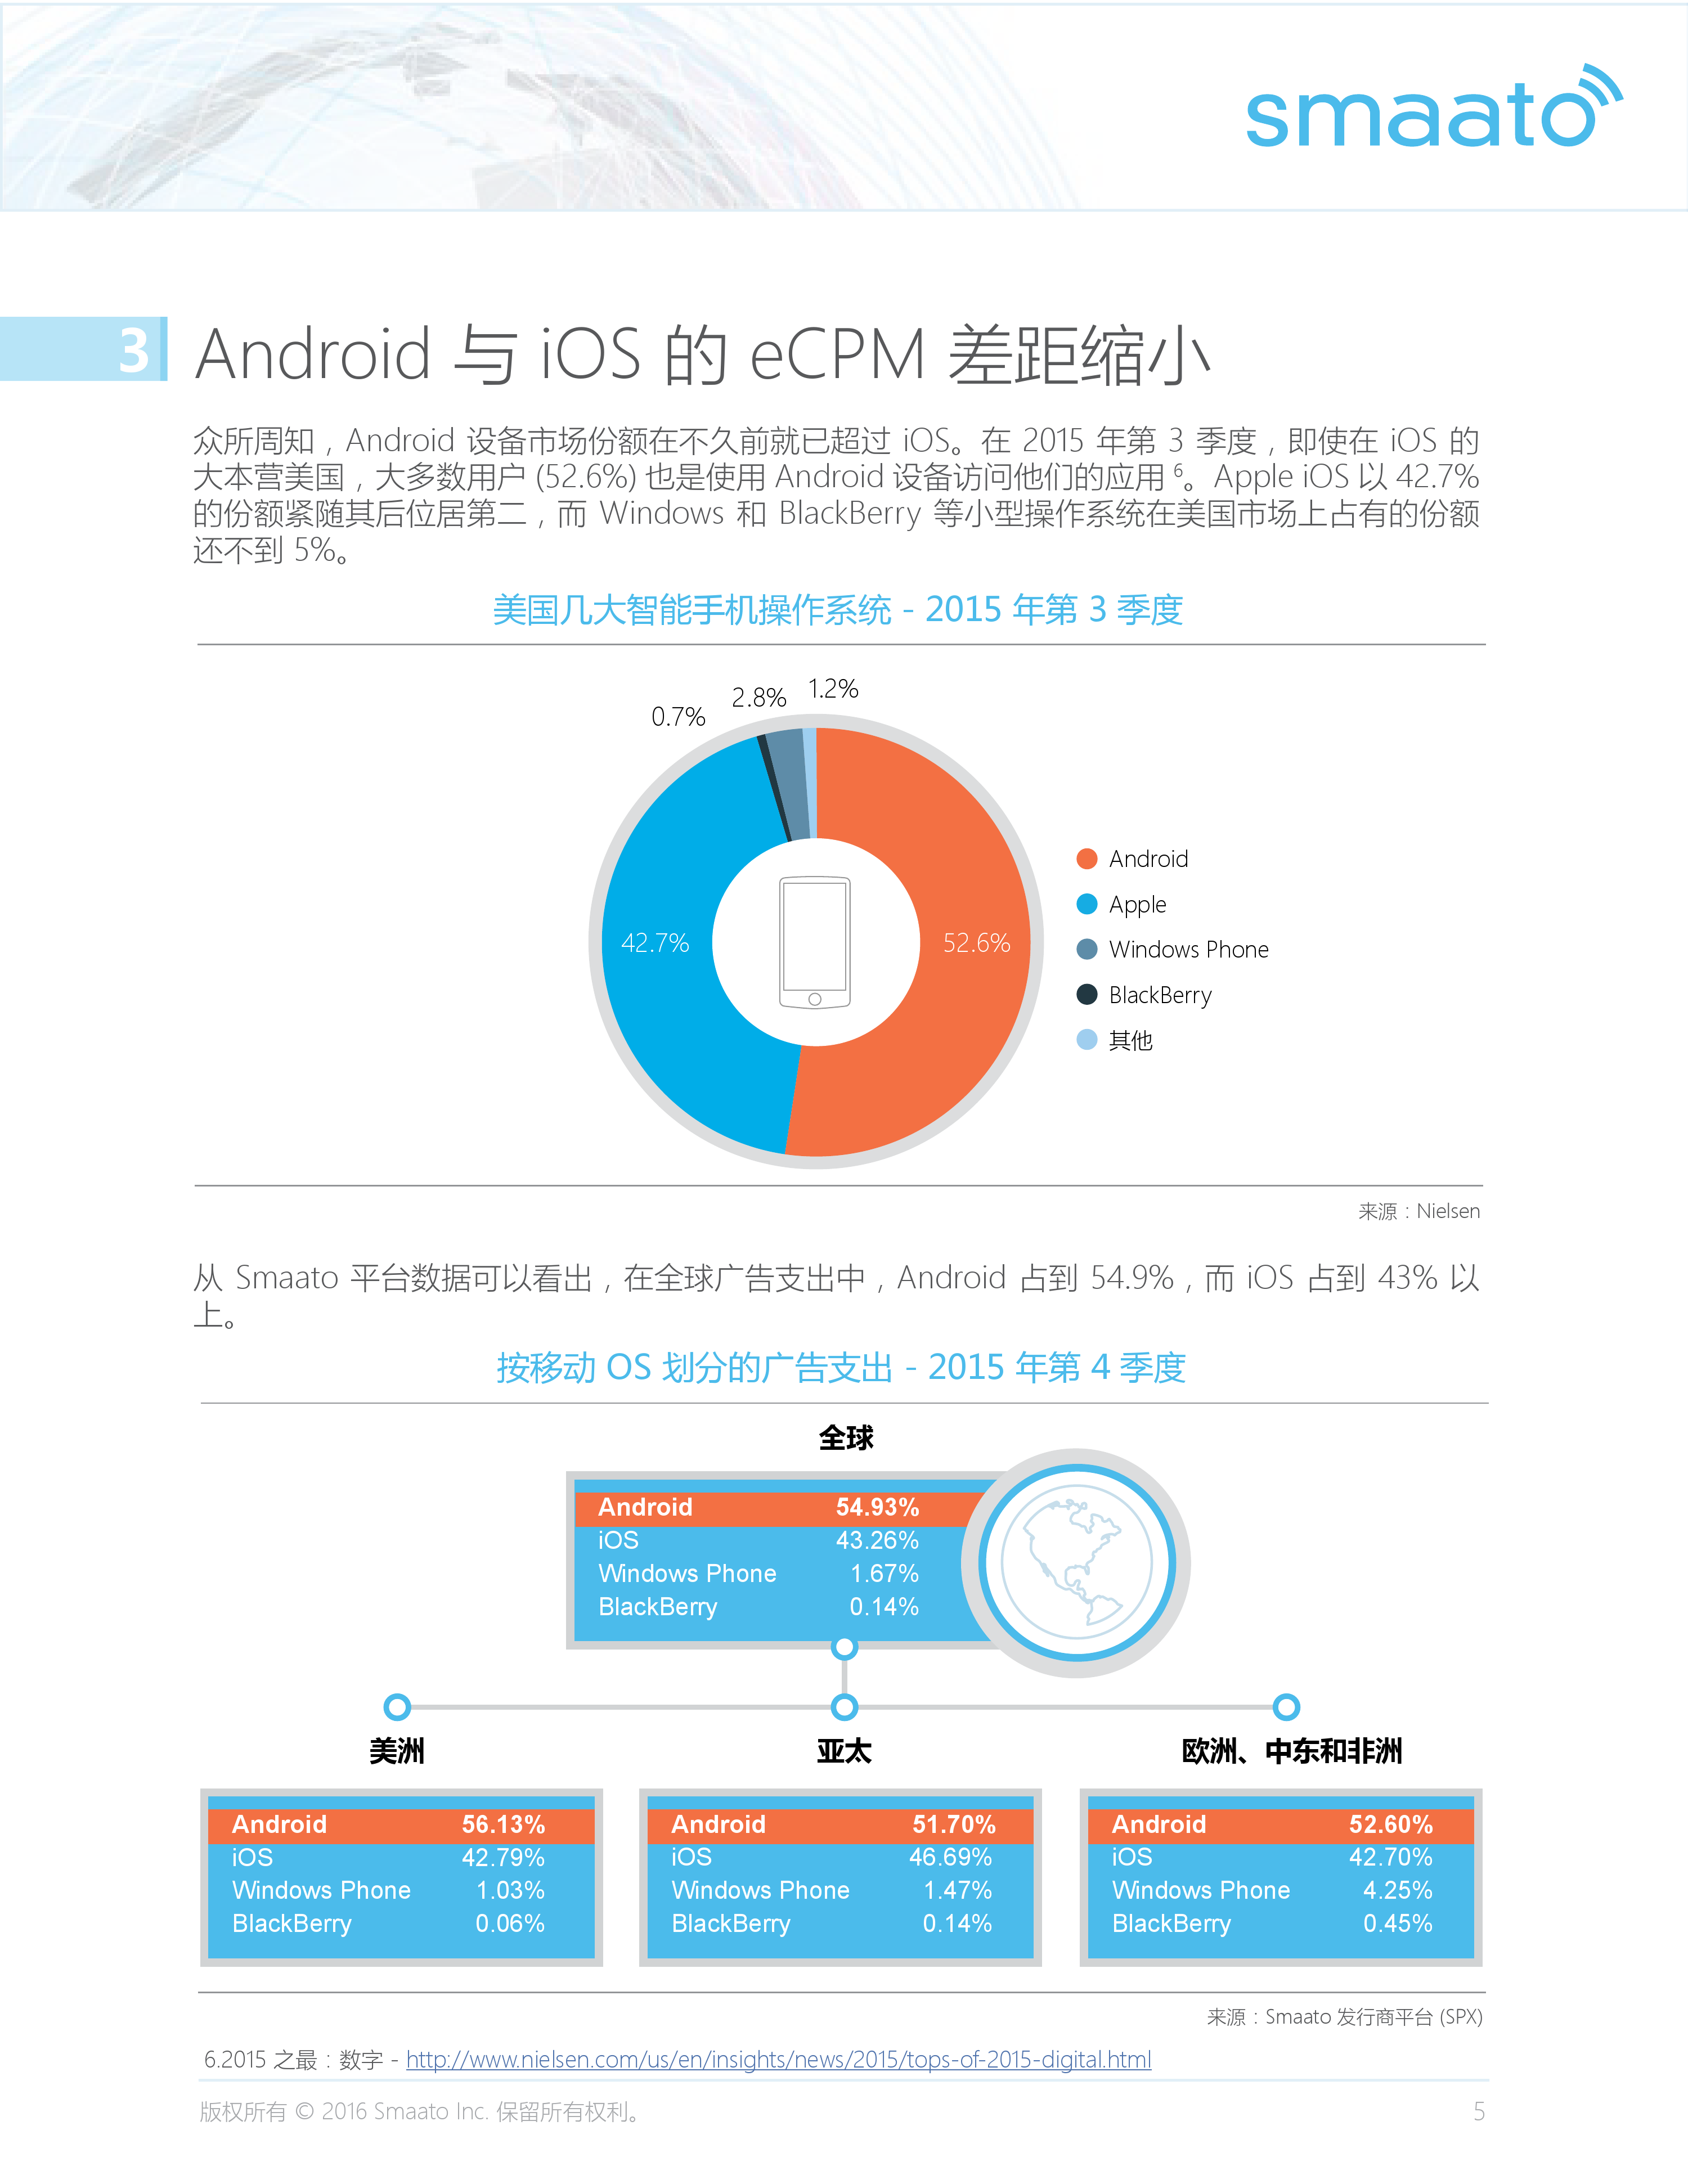 Smaato_Global_Trends_in_Mobile_Advertising_Report_Q4_2015_CN_000006